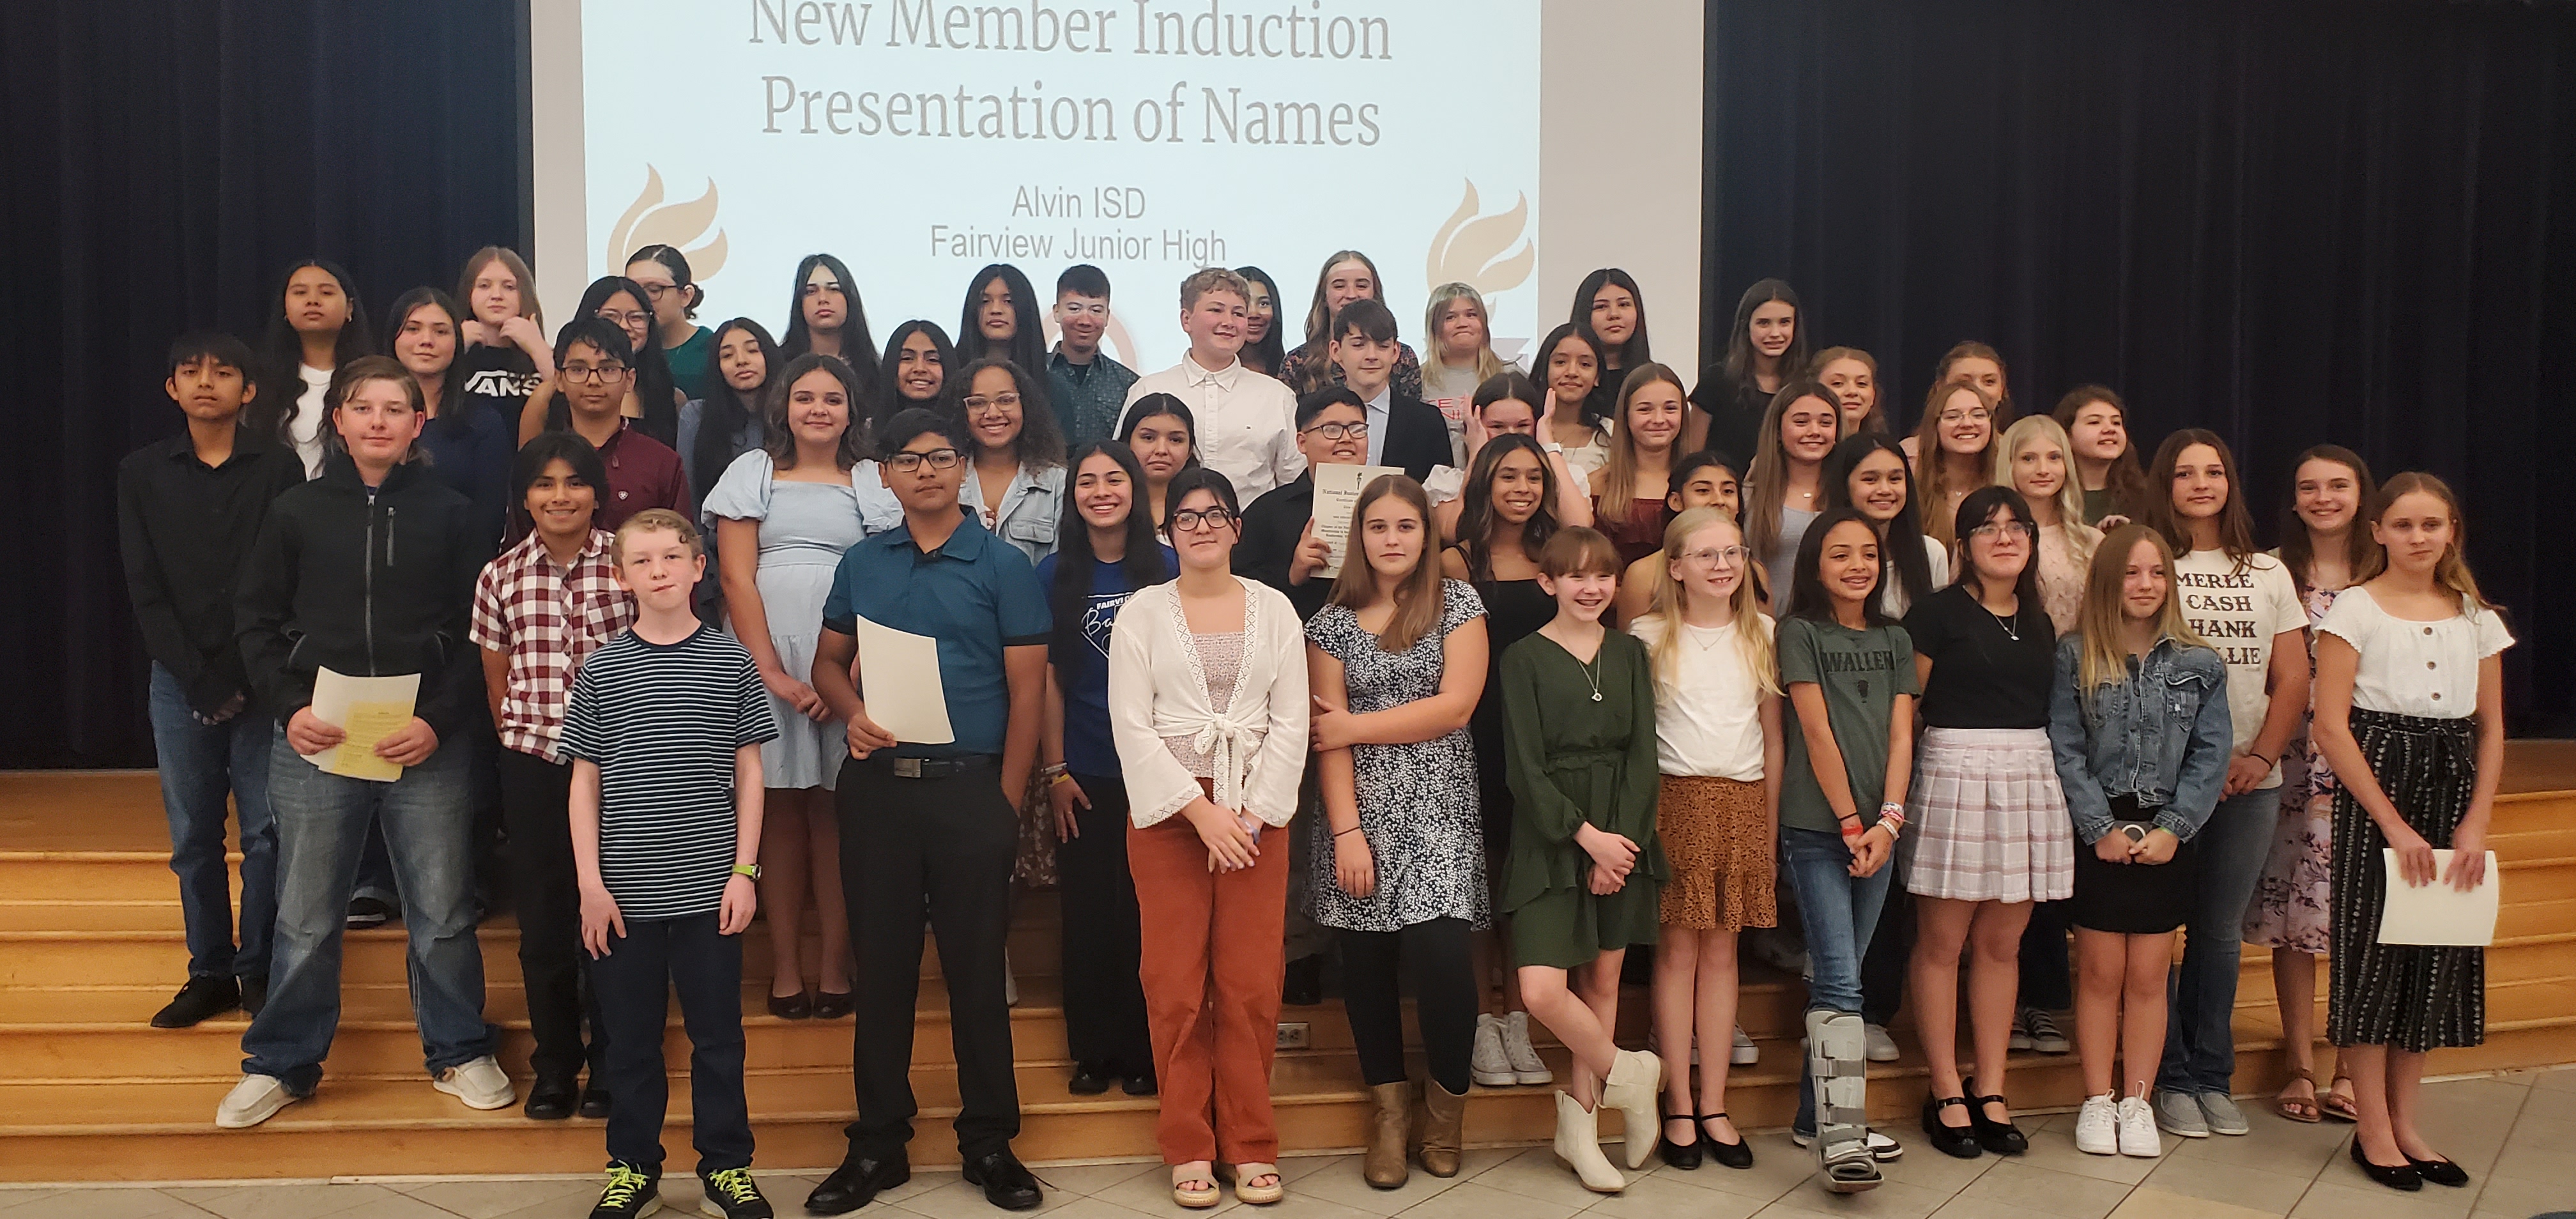 FJH would like to congratulate our recent class of leaders inducted in the fall 2023 term.